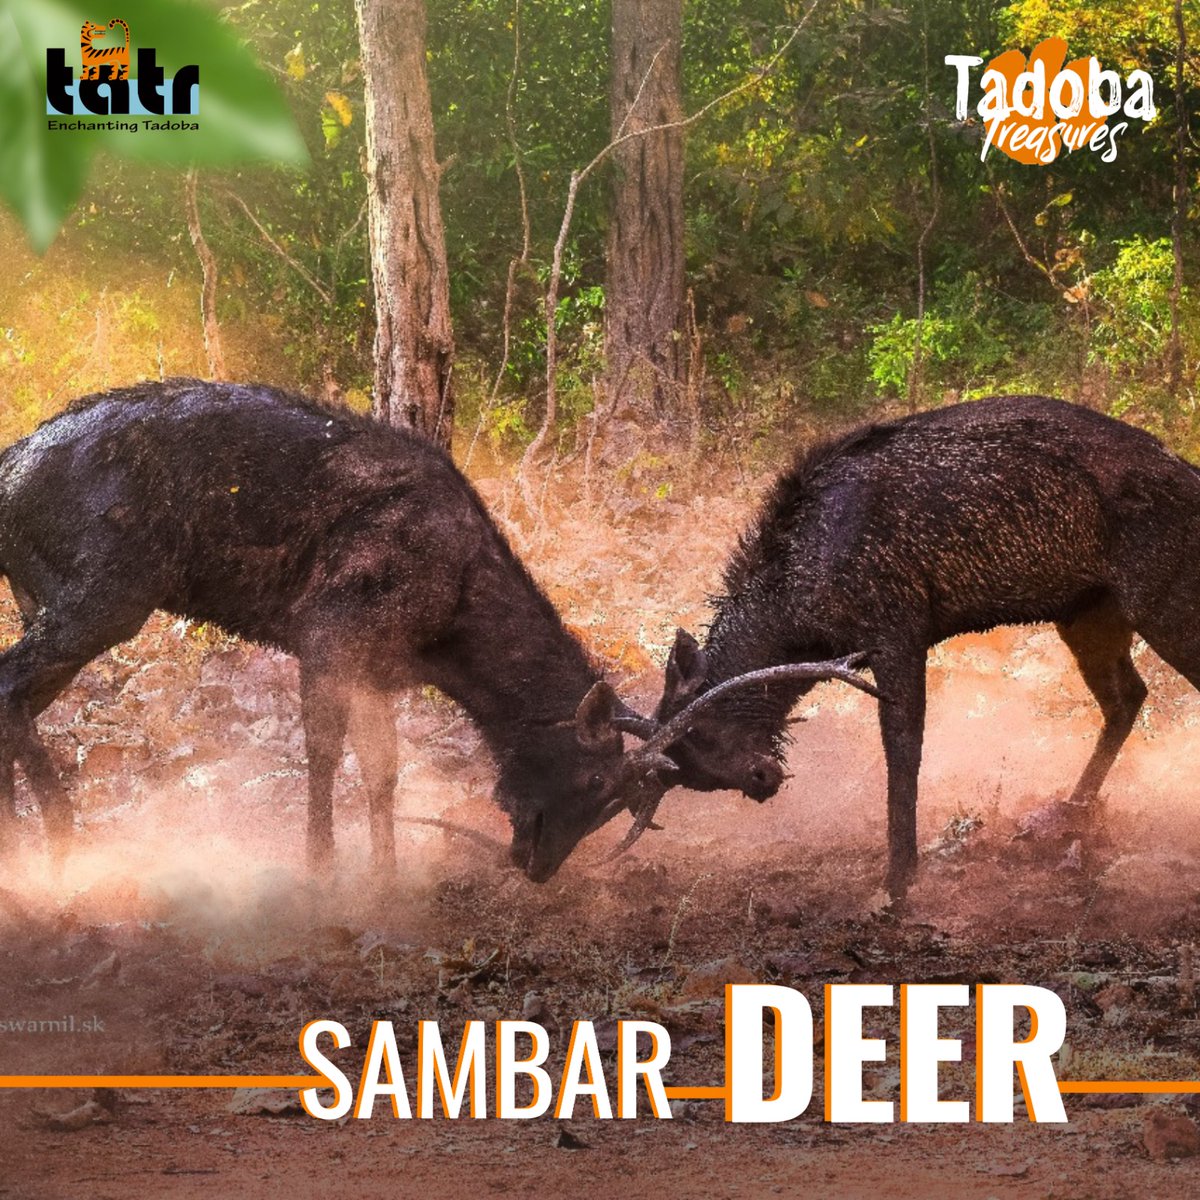 Two magnificent Sambar deer can be seen fighting fiercely in the picture, their antlers entwined as they push and shove one another in a show of power and will. Their muscles tremble with intensity, and their bodies tense.
#Tadoba  #NatureReserve#SambarDeer #NatureEncounters